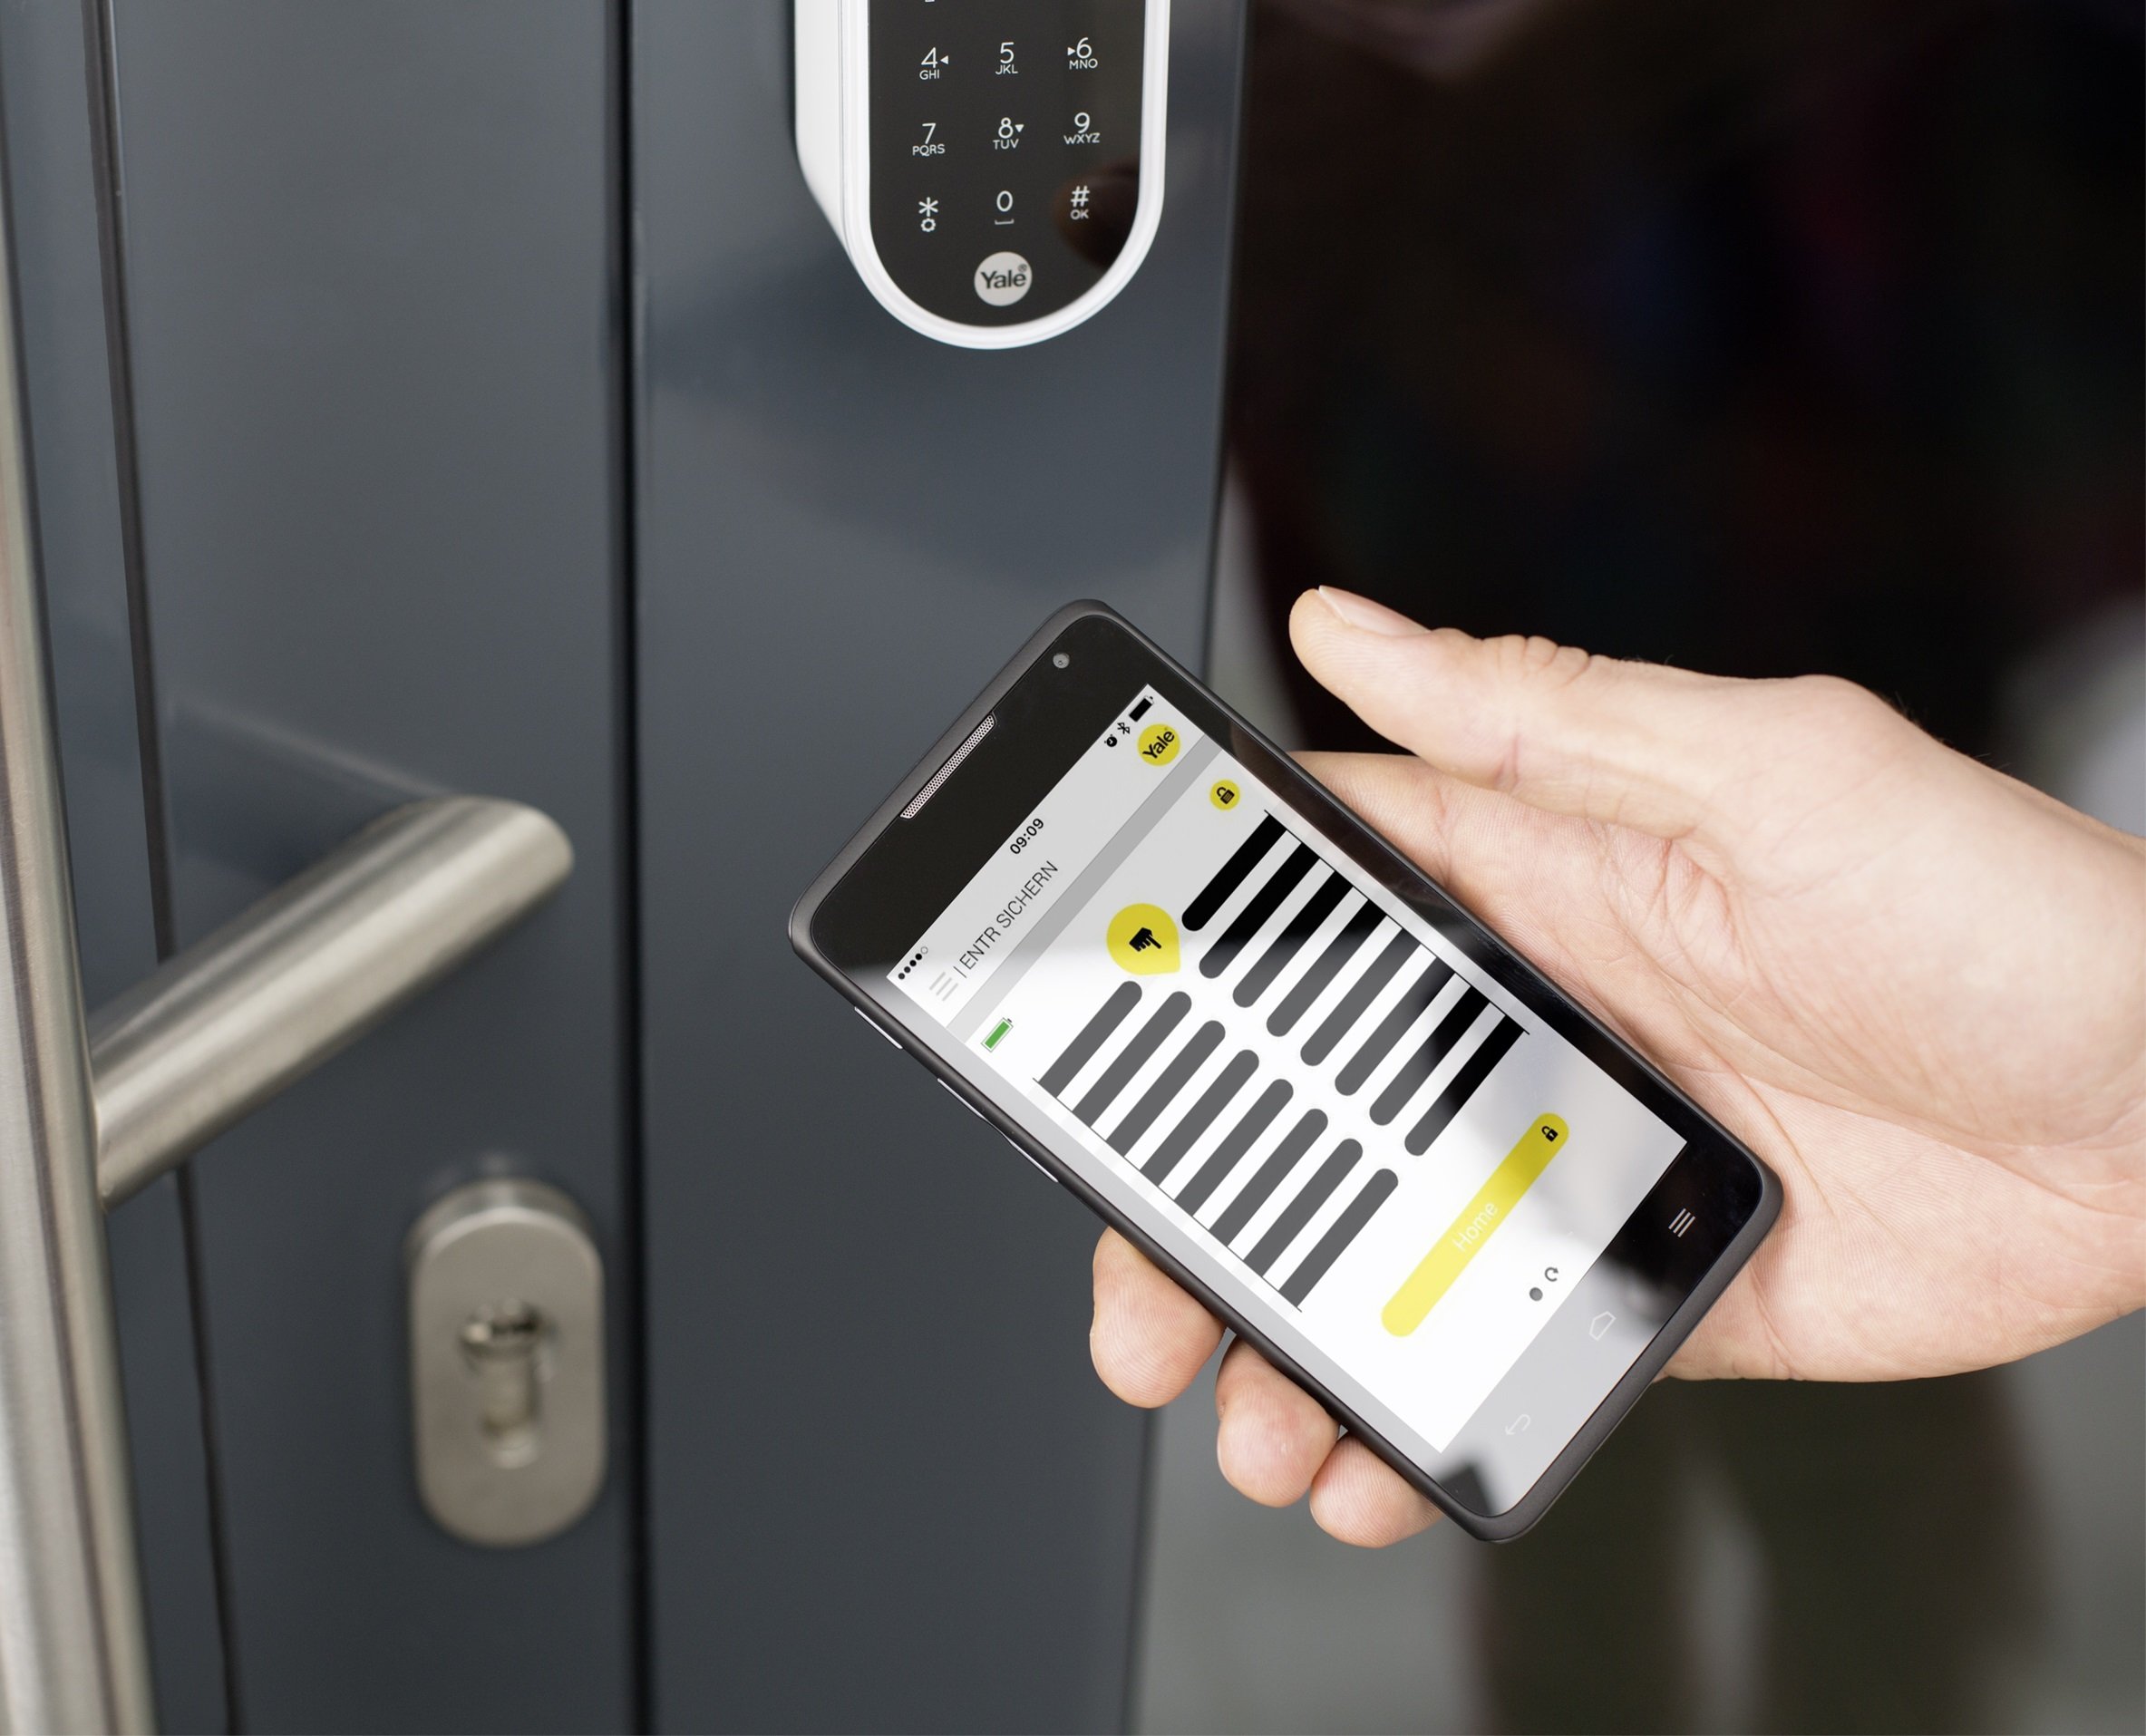 ENTR the awardwinning digital lock that turns your front door into a